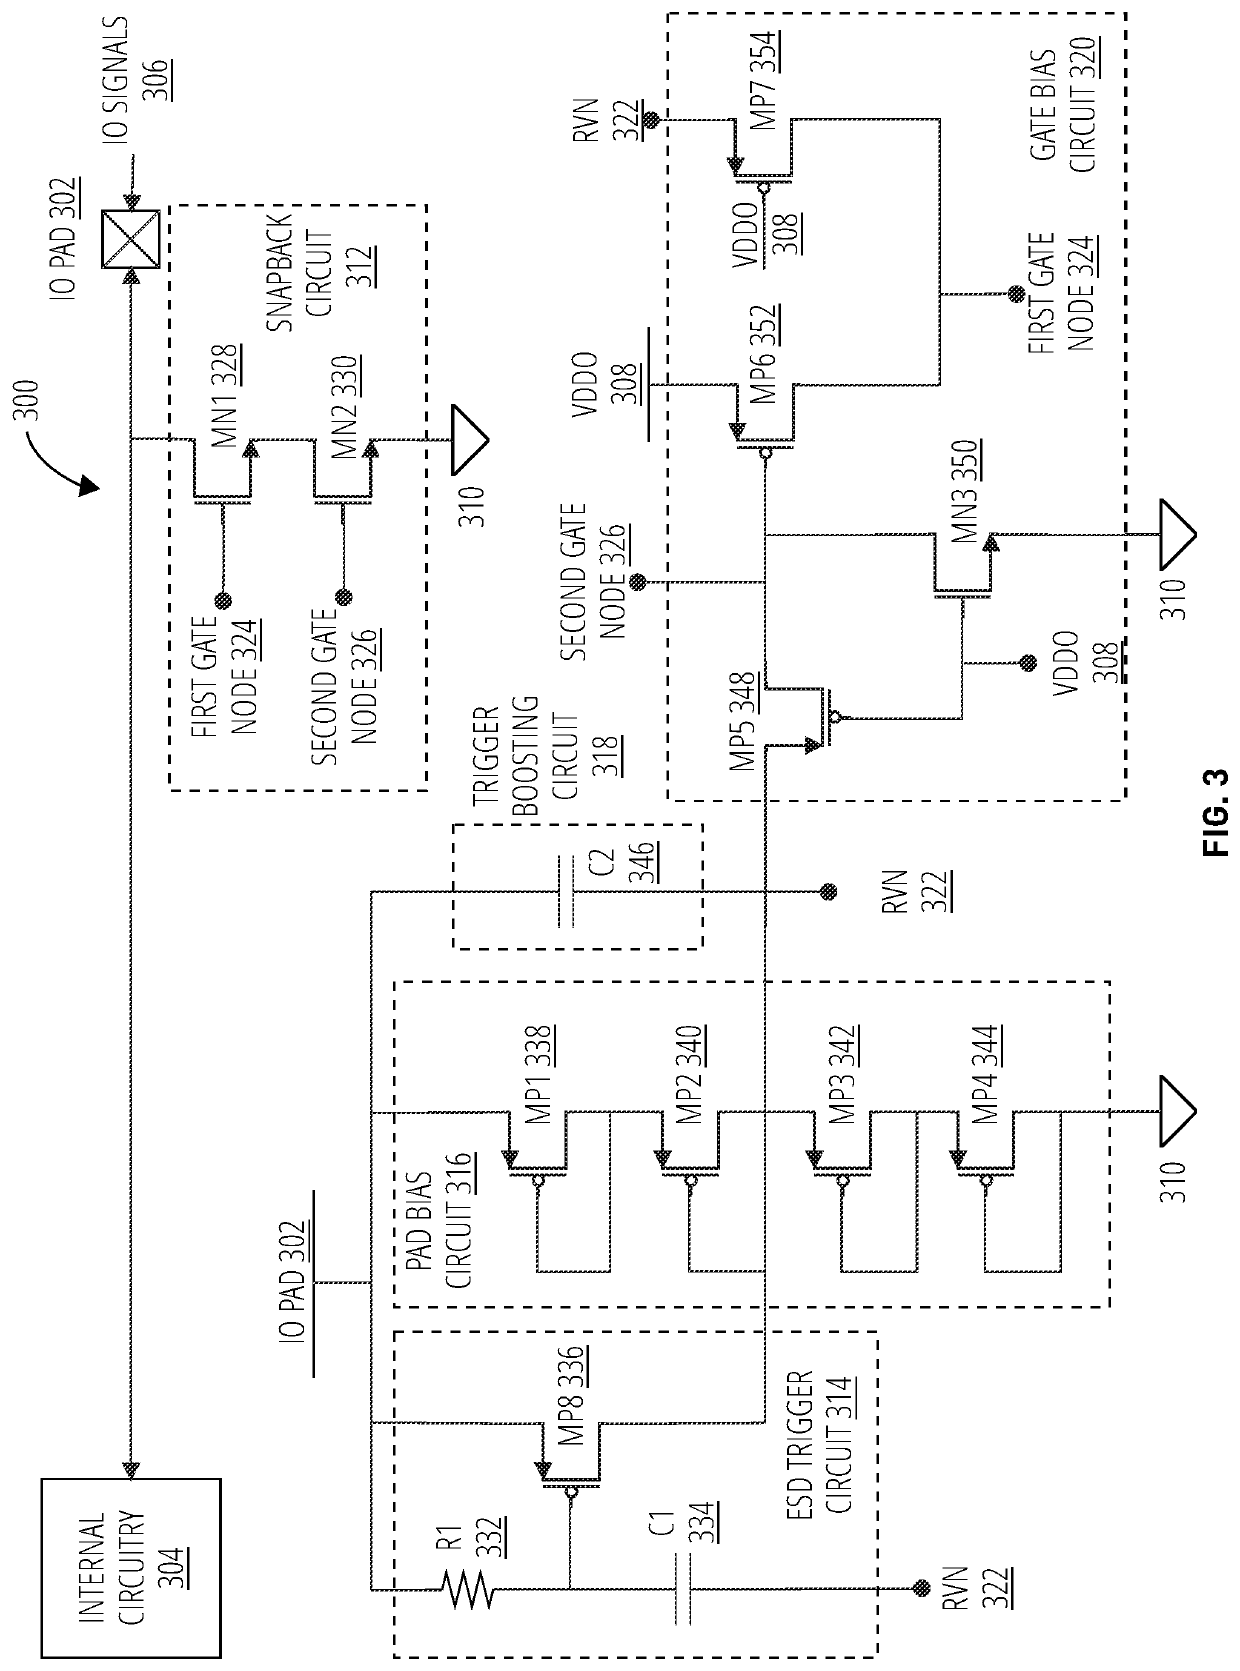 Snapback electrostatic discharge protection for electronic circuits